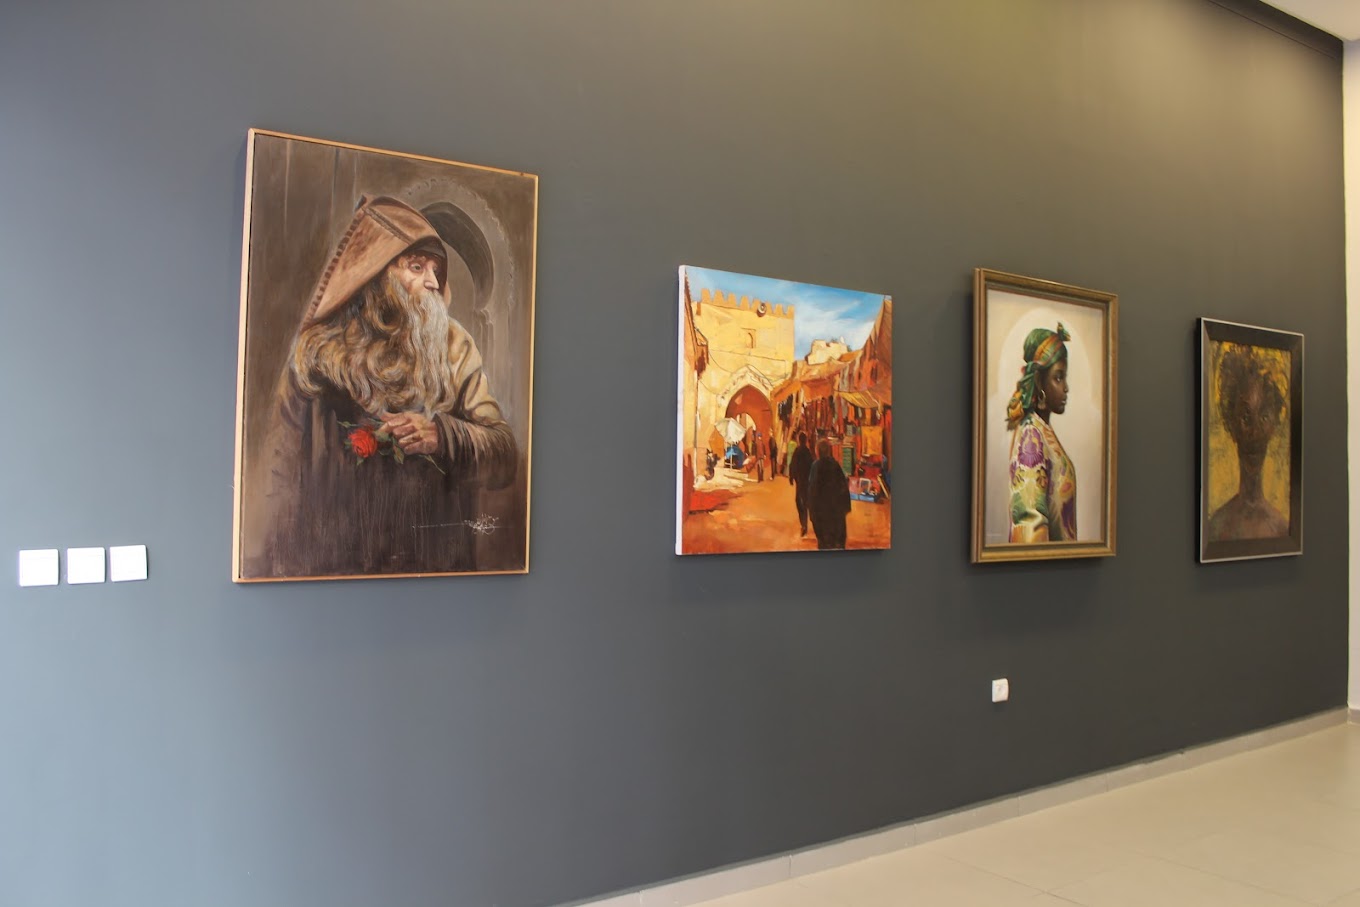 Displayed artworks in the Medina Art Gallery primarily exhibiting works by contemporary Moroccan artists & old works with a Western lens